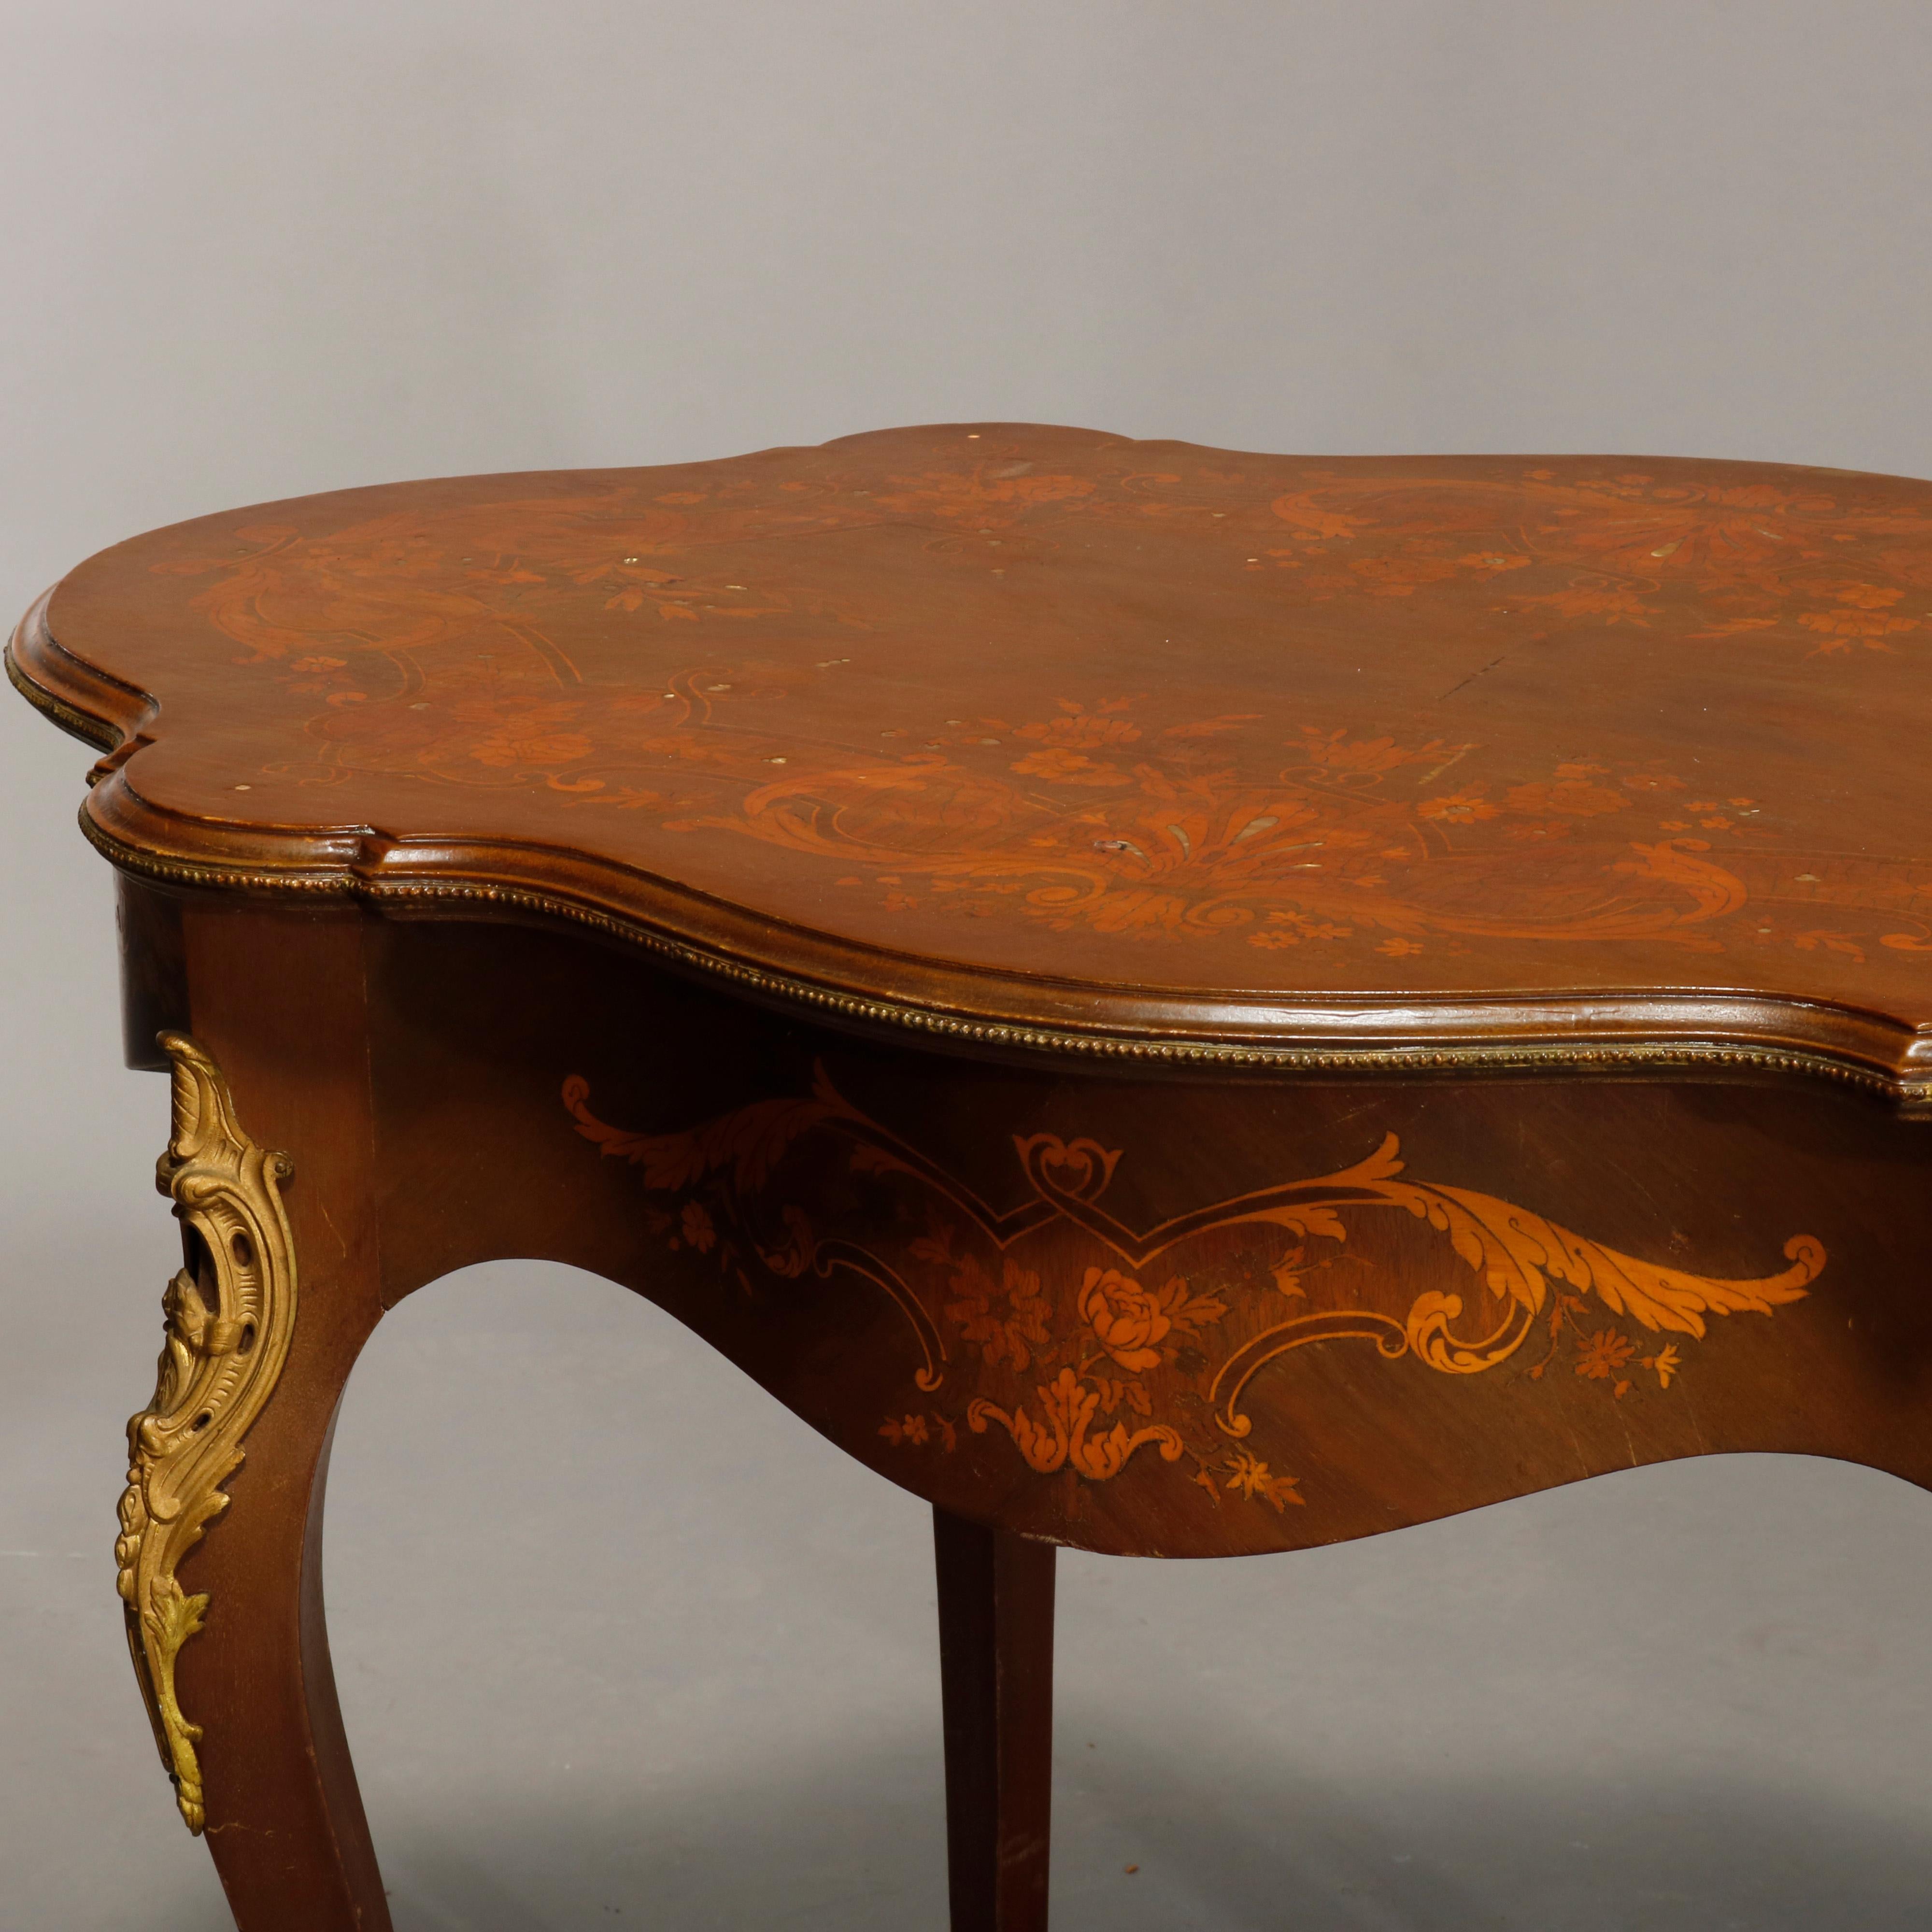 Carved Antique French Louis XIV Mahogany Marquetry & Ormolu Turtle Top Table, c1870